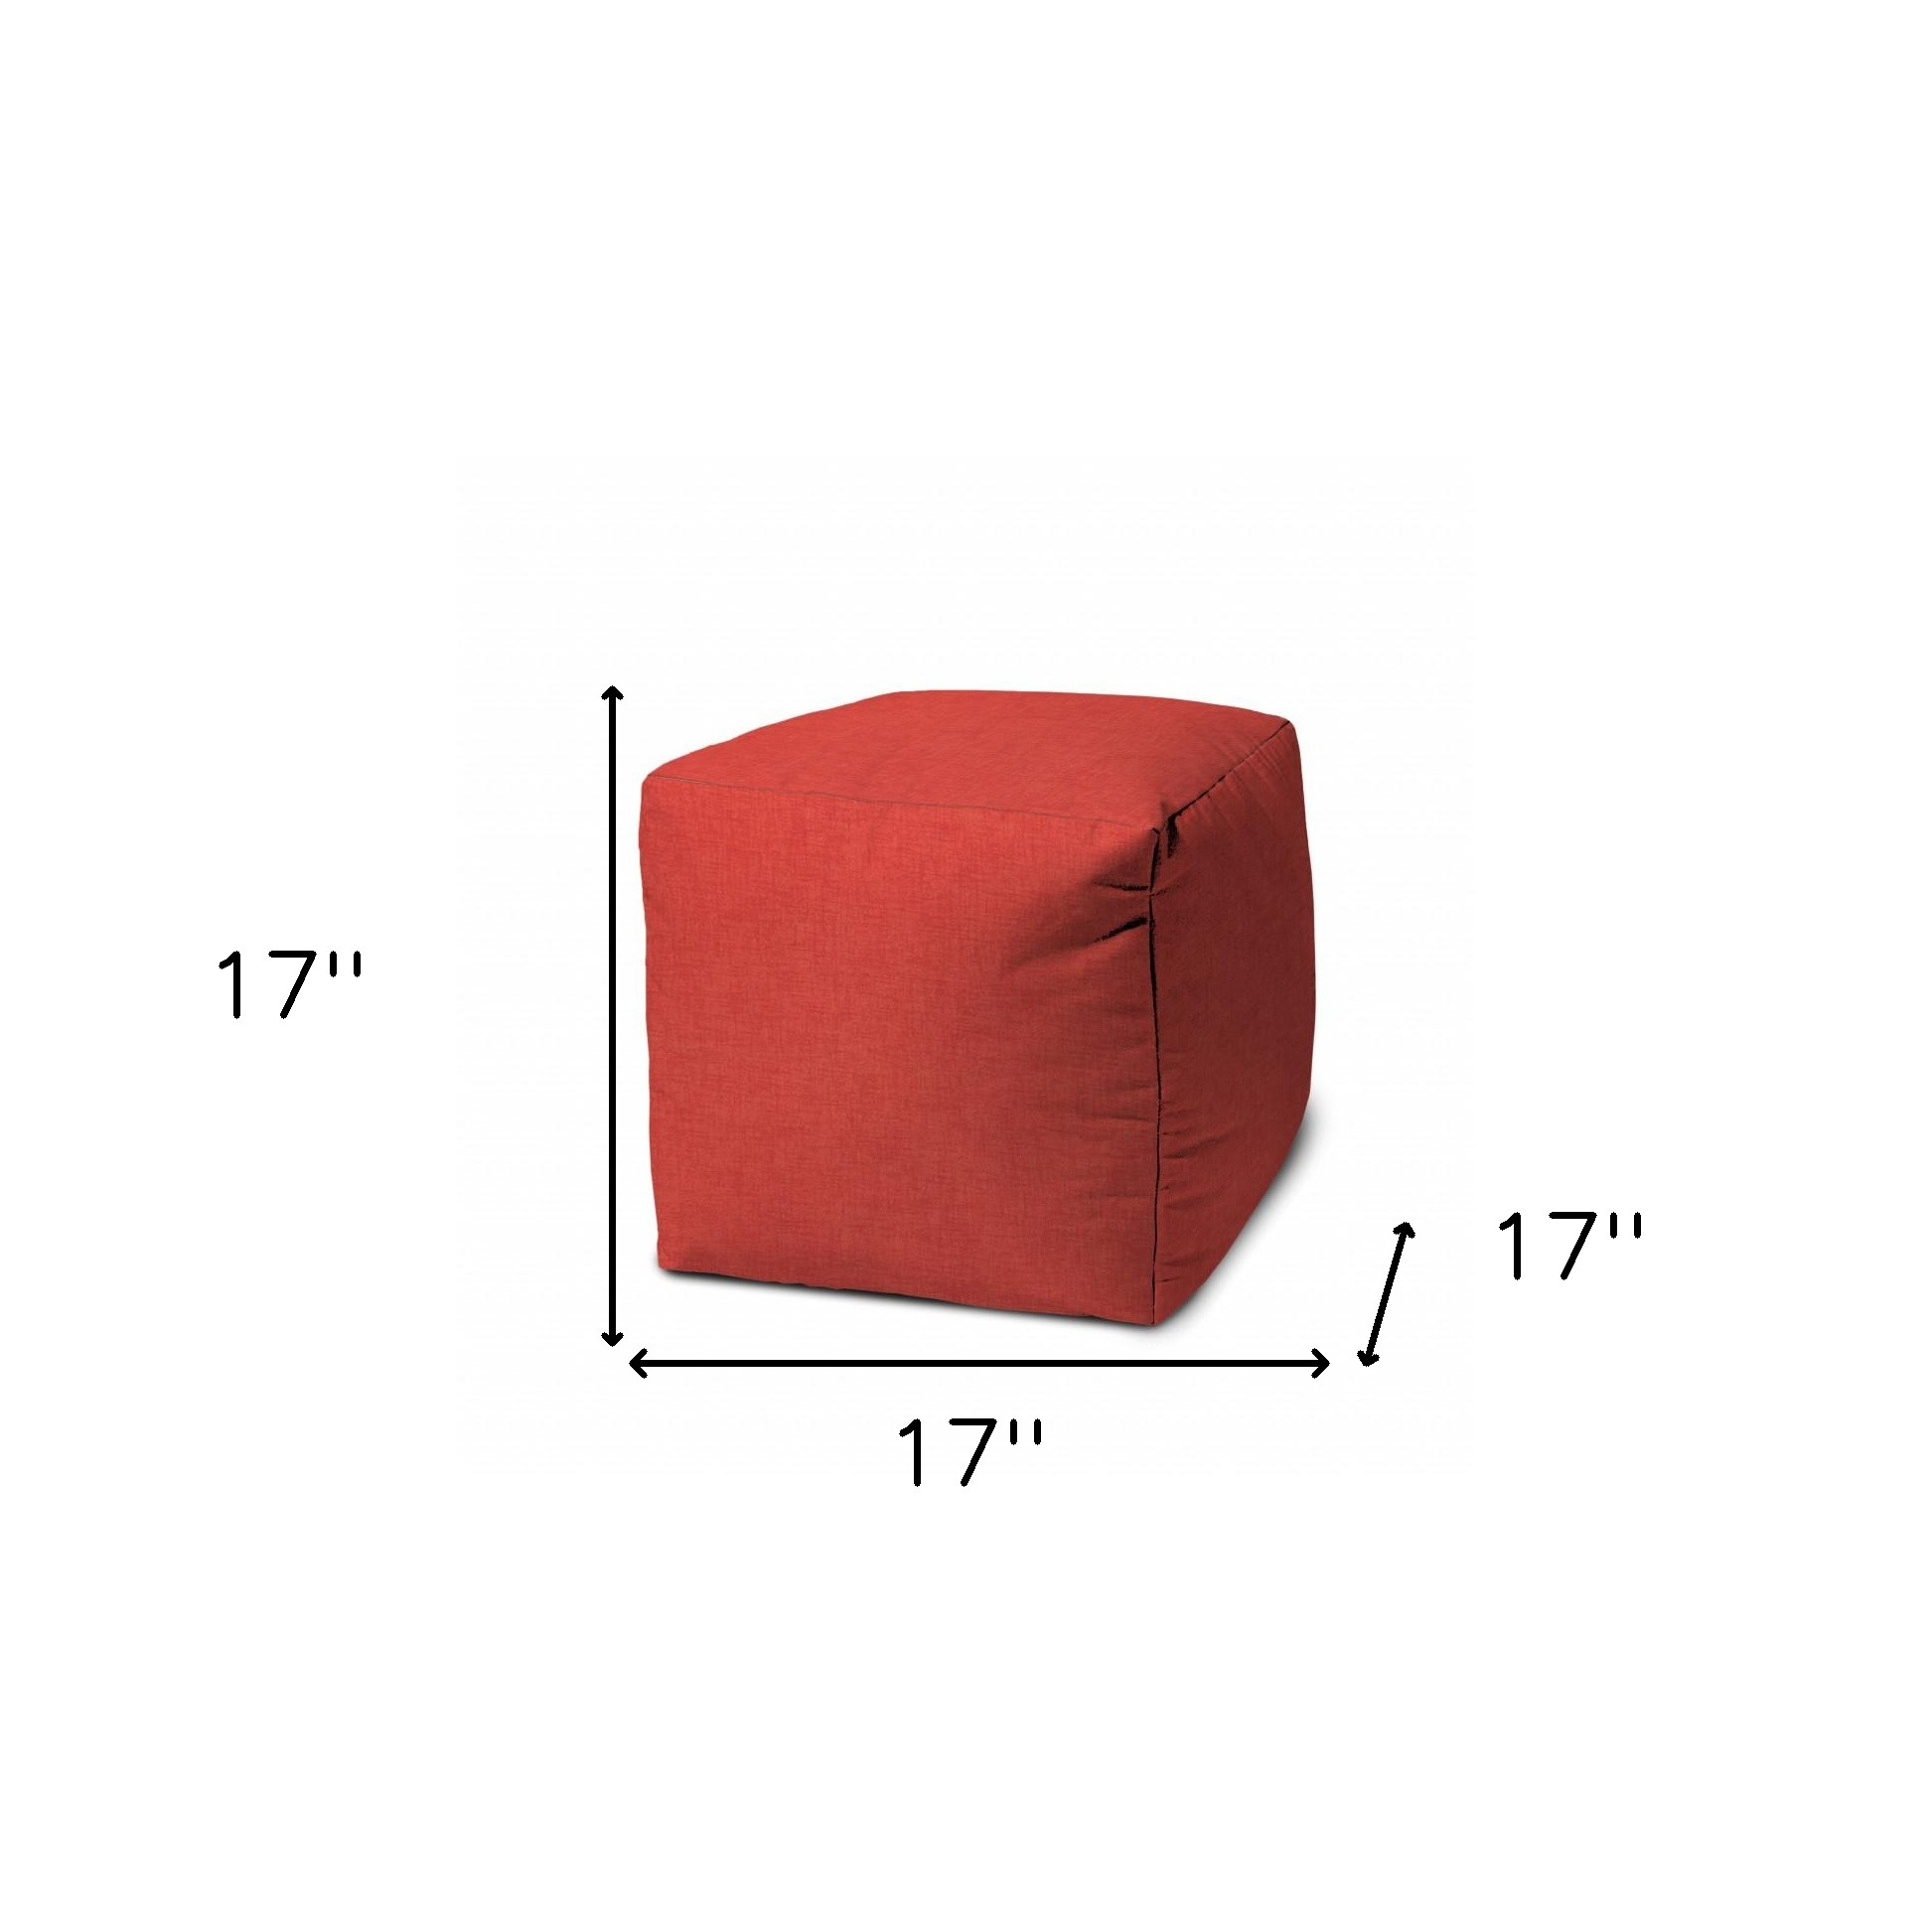 WEAVE Coral Indoor/Outdoor Pouf - Zipper Cover with Luxury Polyfil Stuffing  - 17 x 17 x 17 Cube